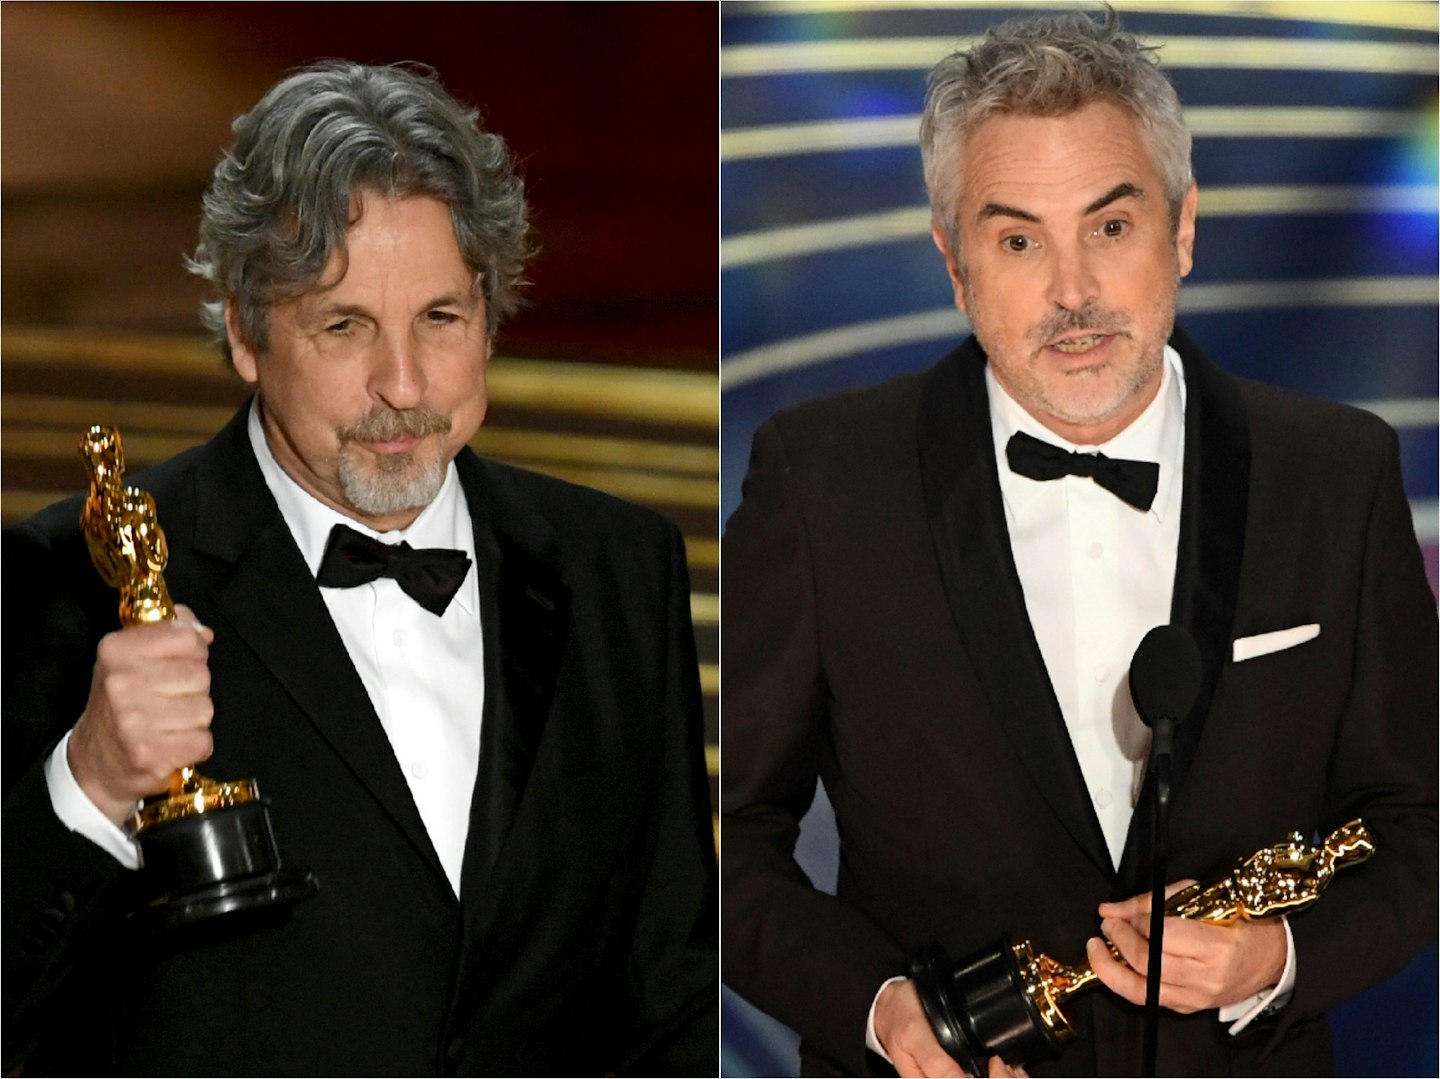 Peter Farelly, Alfonso Cuaron at the 2019 Oscars